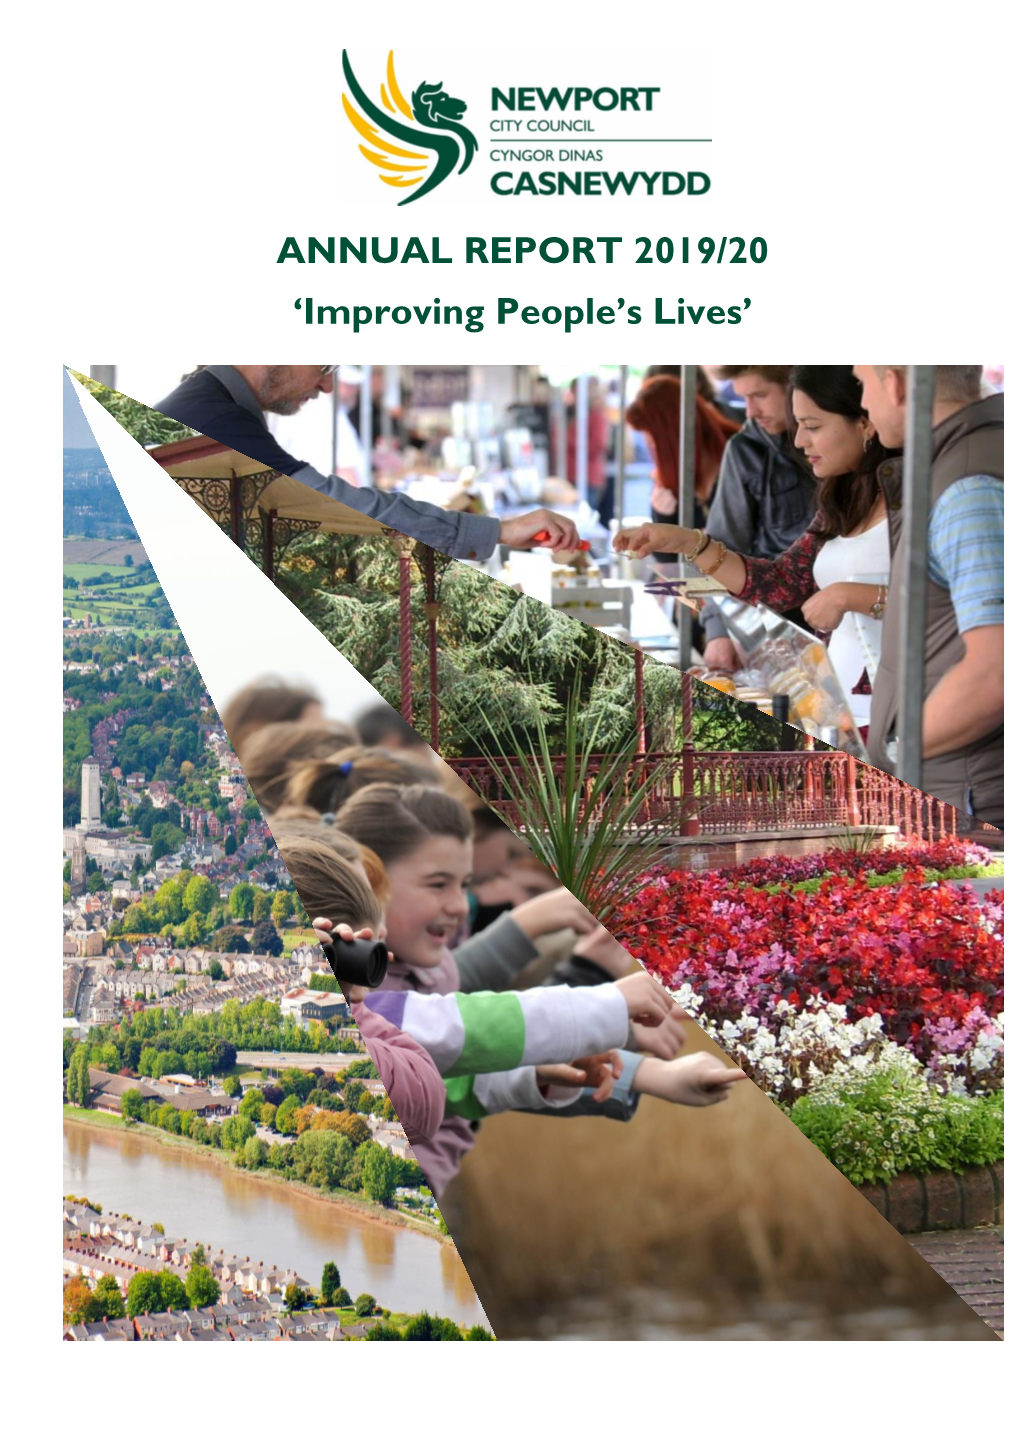 ANNUAL REPORT 2019/20 'Improving People's Lives'